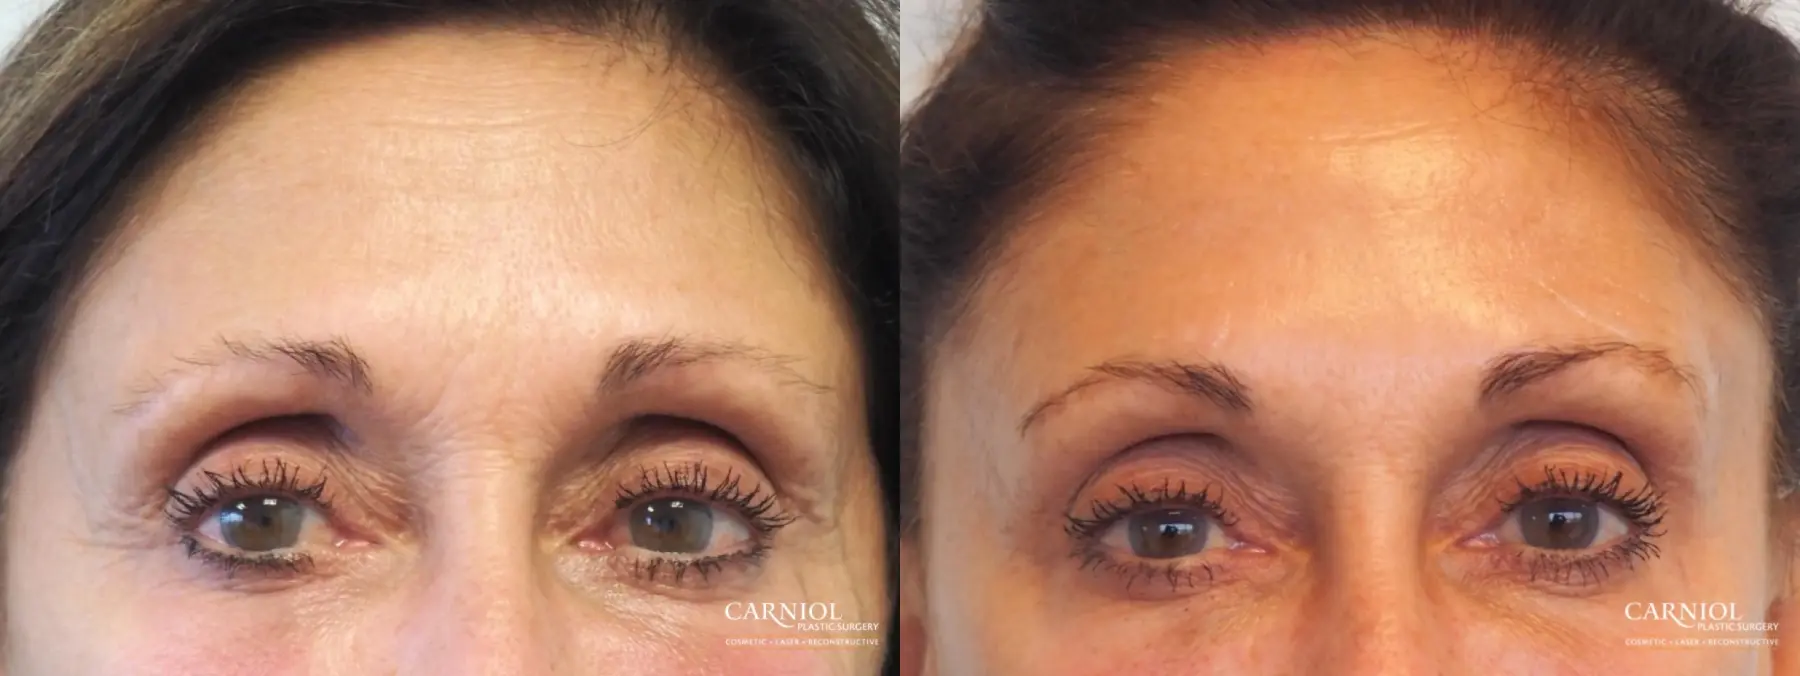 BOTOX® Cosmetic: Patient 6 - Before and After 1